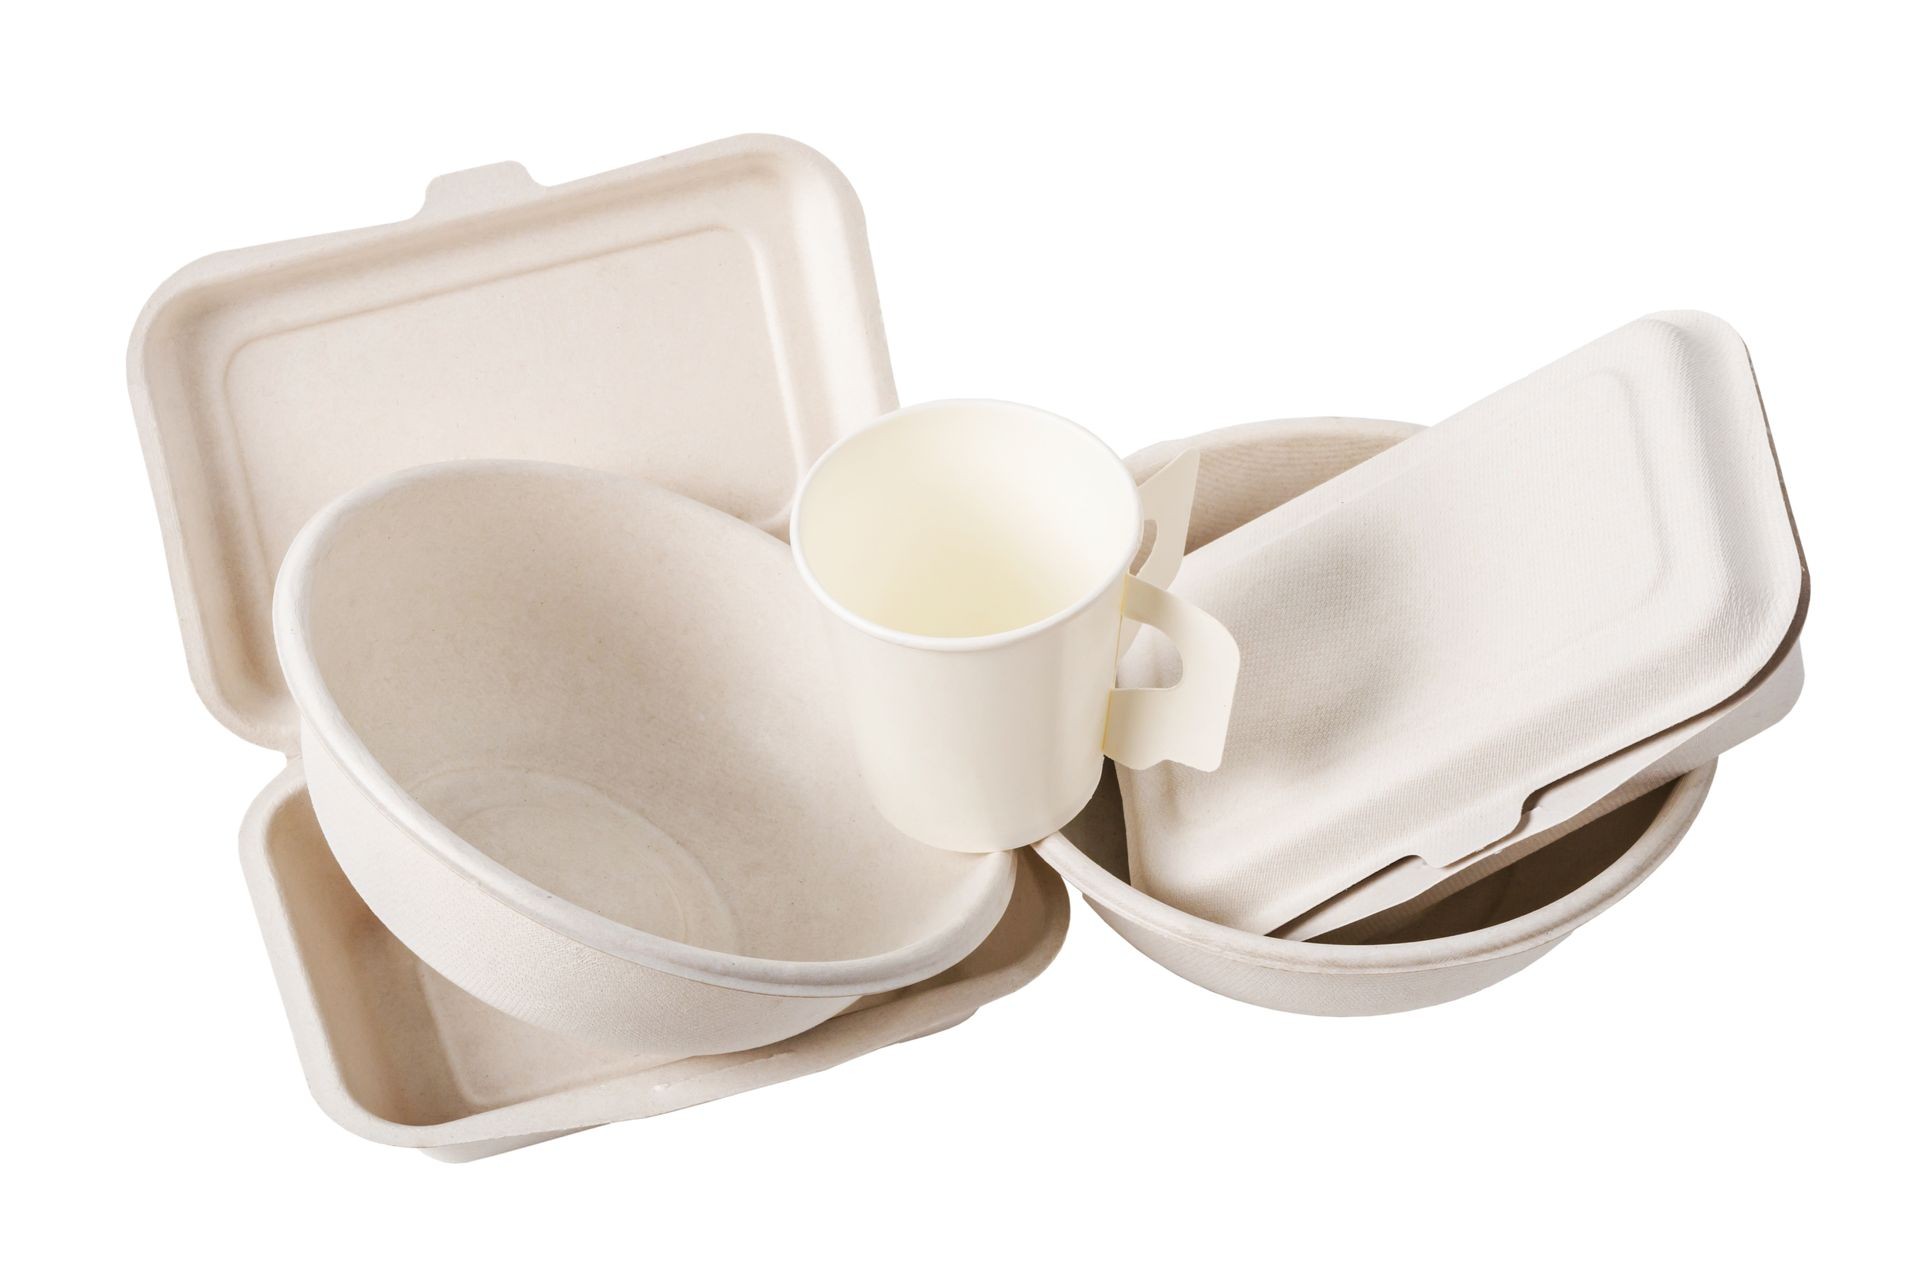 Compostable sugarcane bagasse products or tableware - Eco-frienfly dining solutions